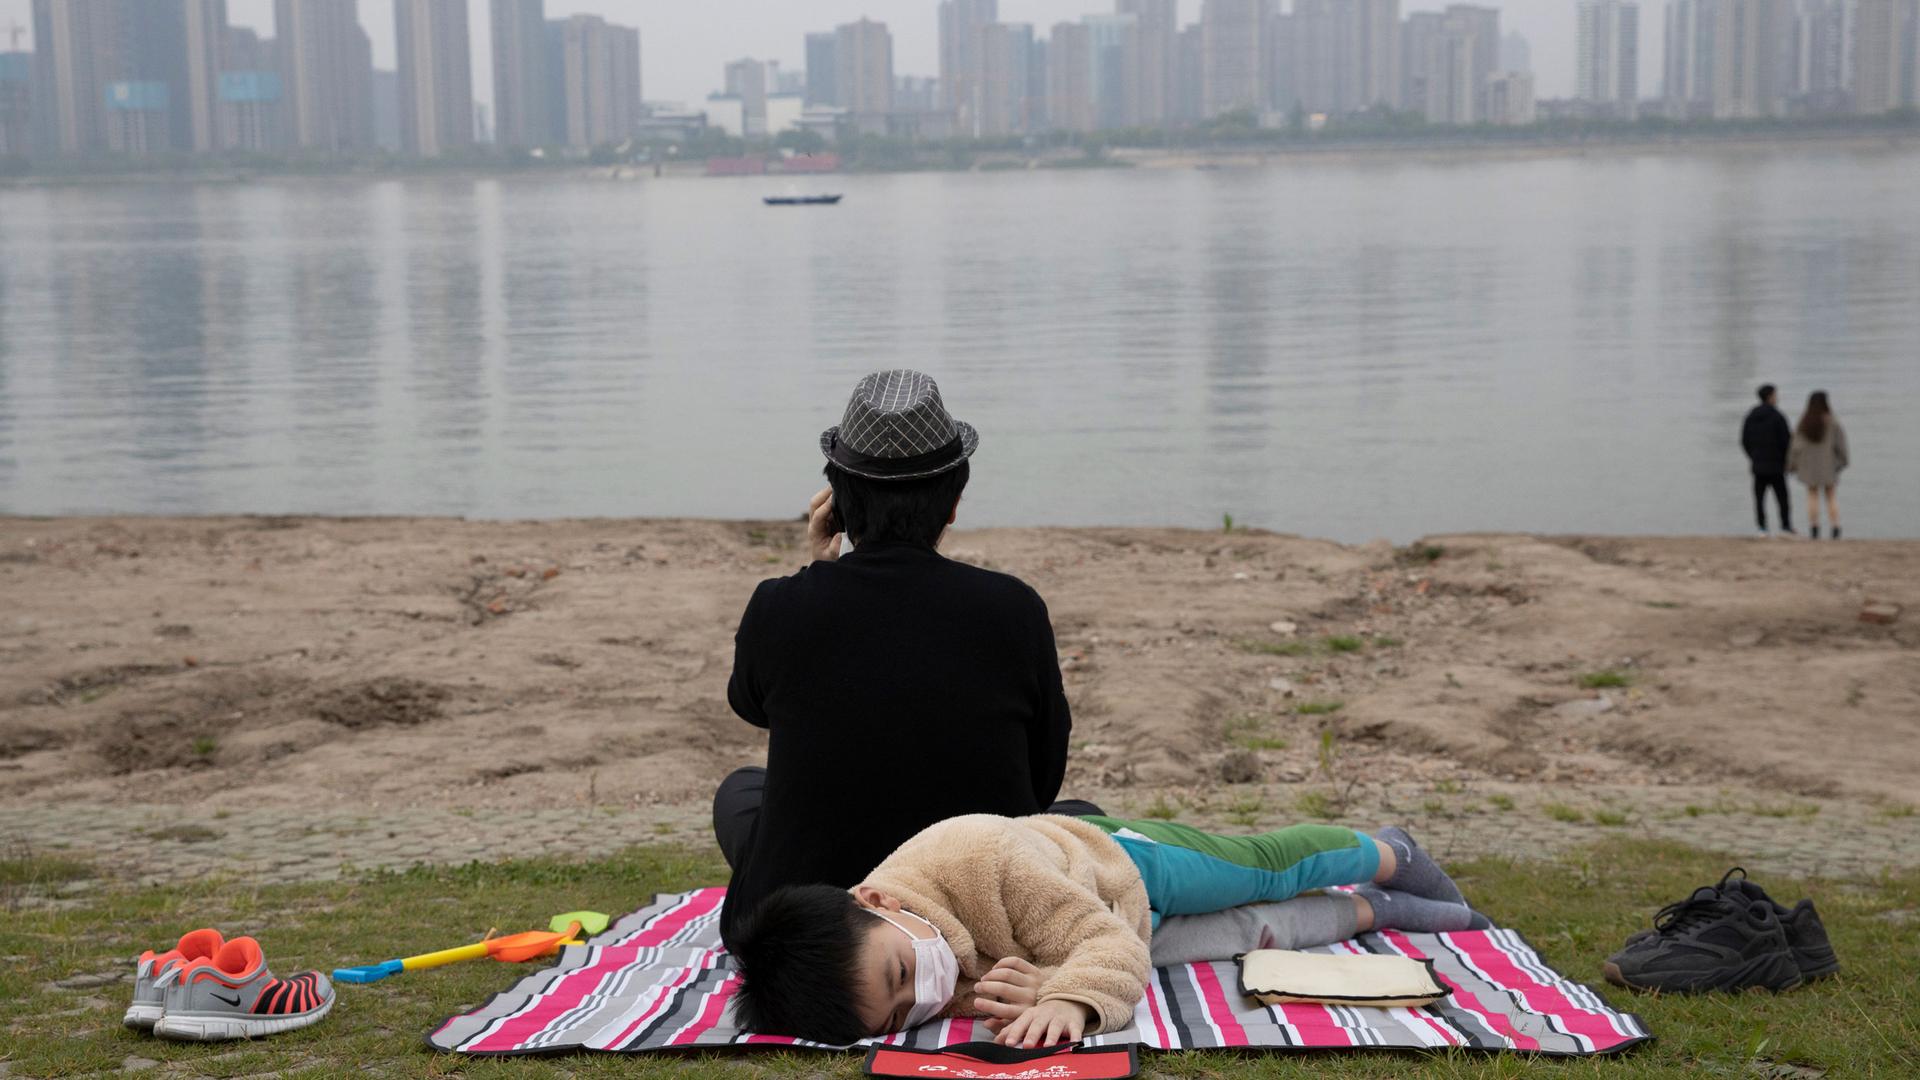 A young child is shown laying on a striped blanket and wearing a mask with a man sitting and facing the opposite direction looks on at the Yangtze River.